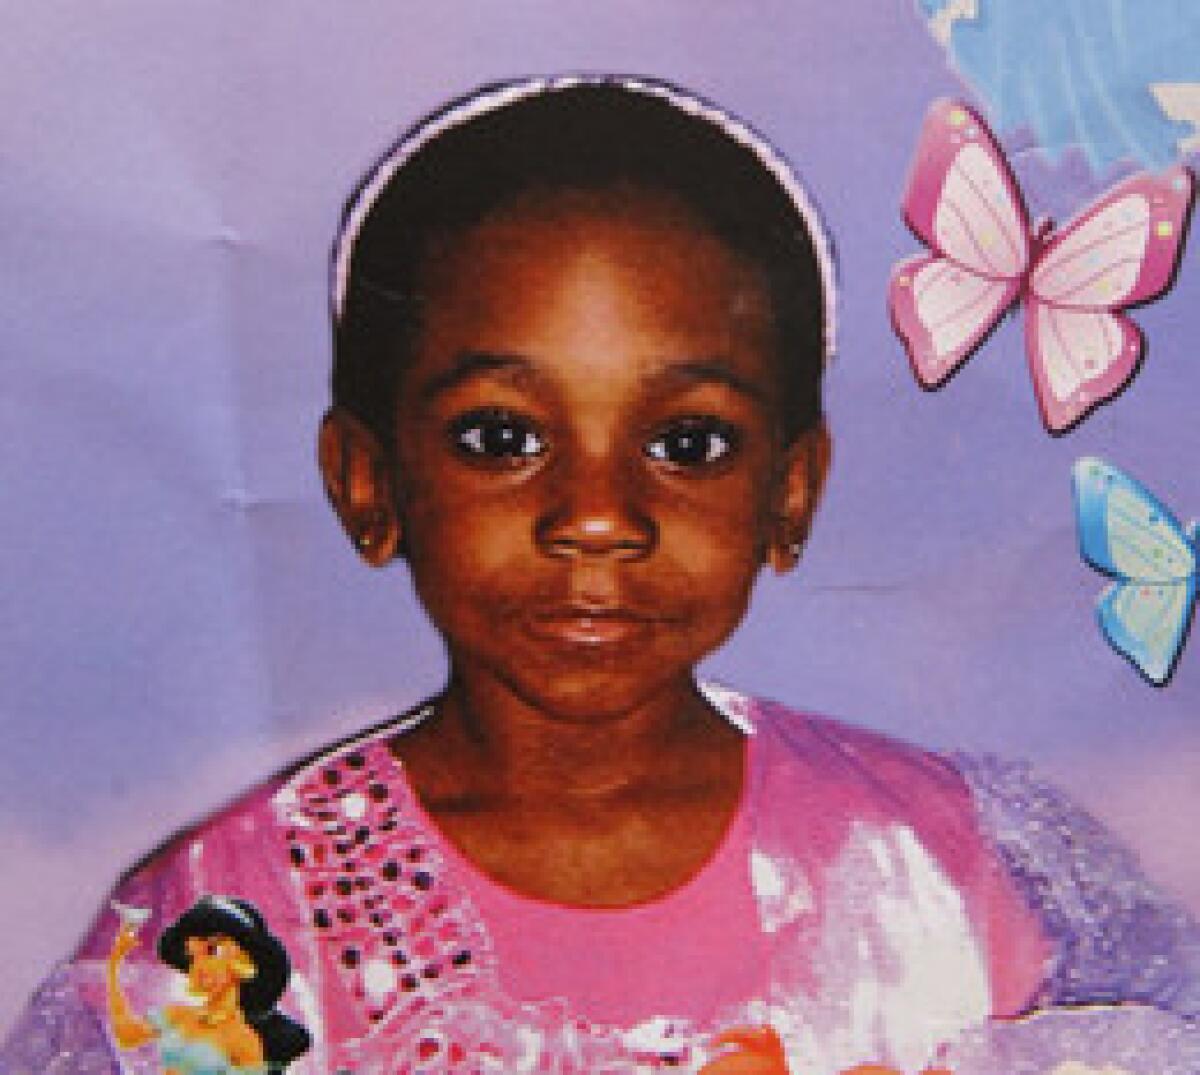 Olivia Van Clief's daughter, Viola, died while under the foster care of Kiana Barker. Barker, who was supervised by United Care, a private foster agency that, despite numerous dead children and other violations, the state allowed it to stay in business.